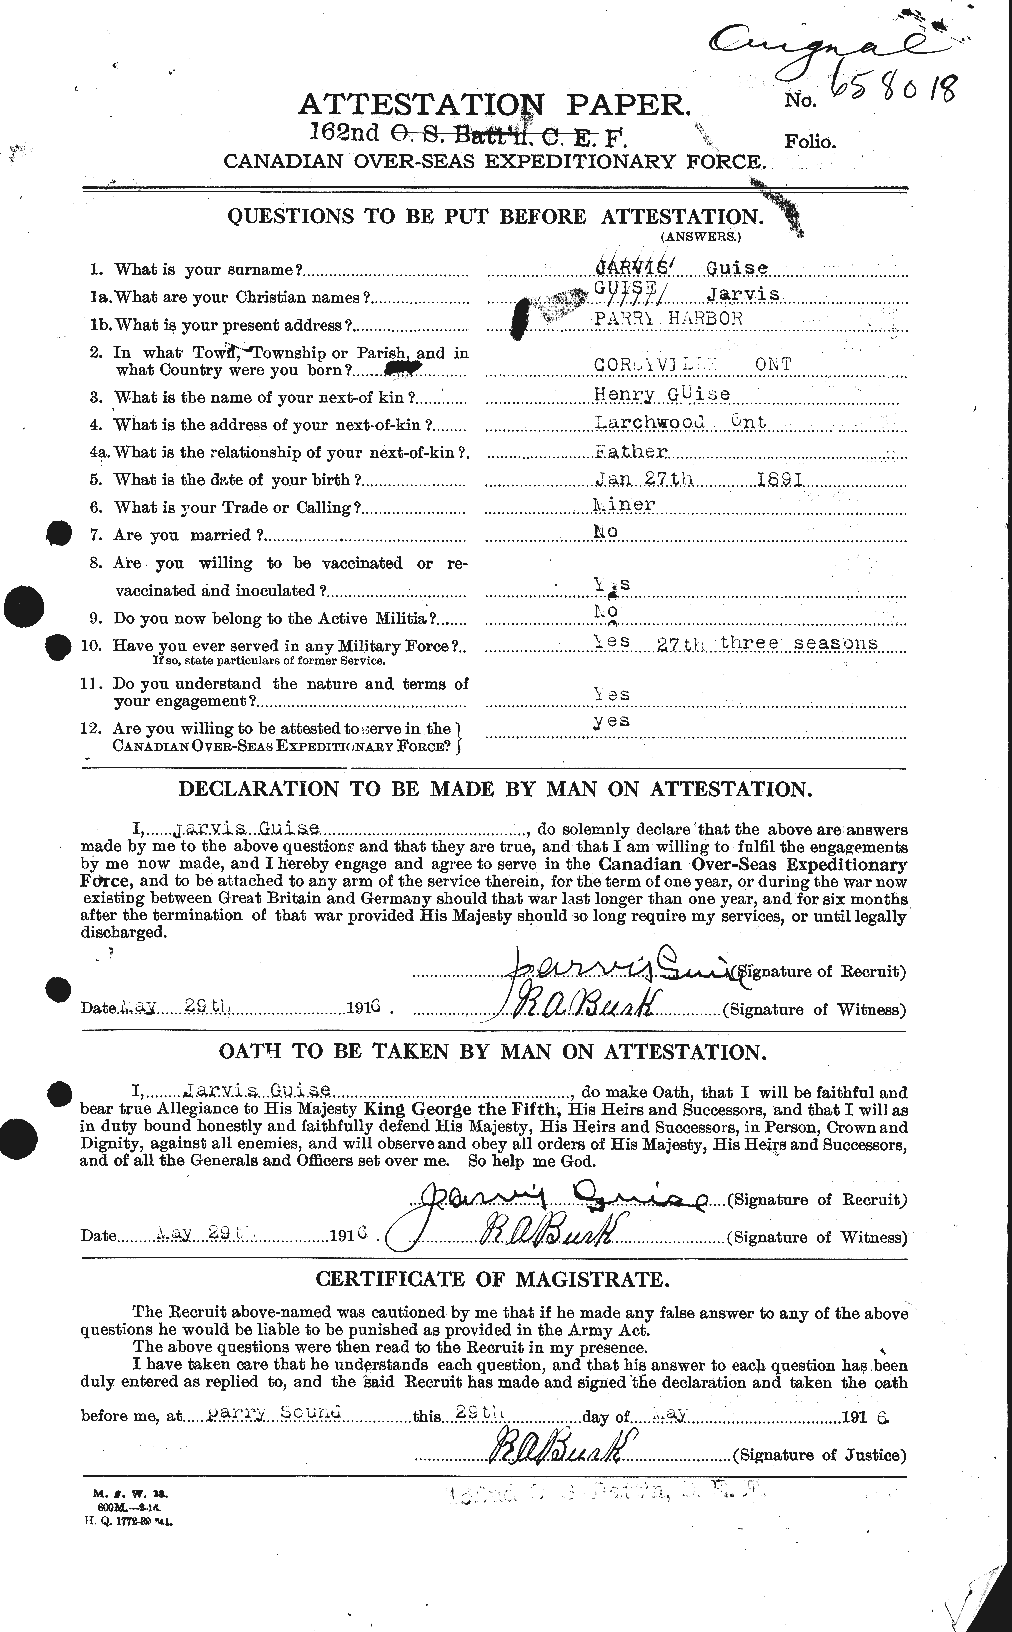 Personnel Records of the First World War - CEF 367816a